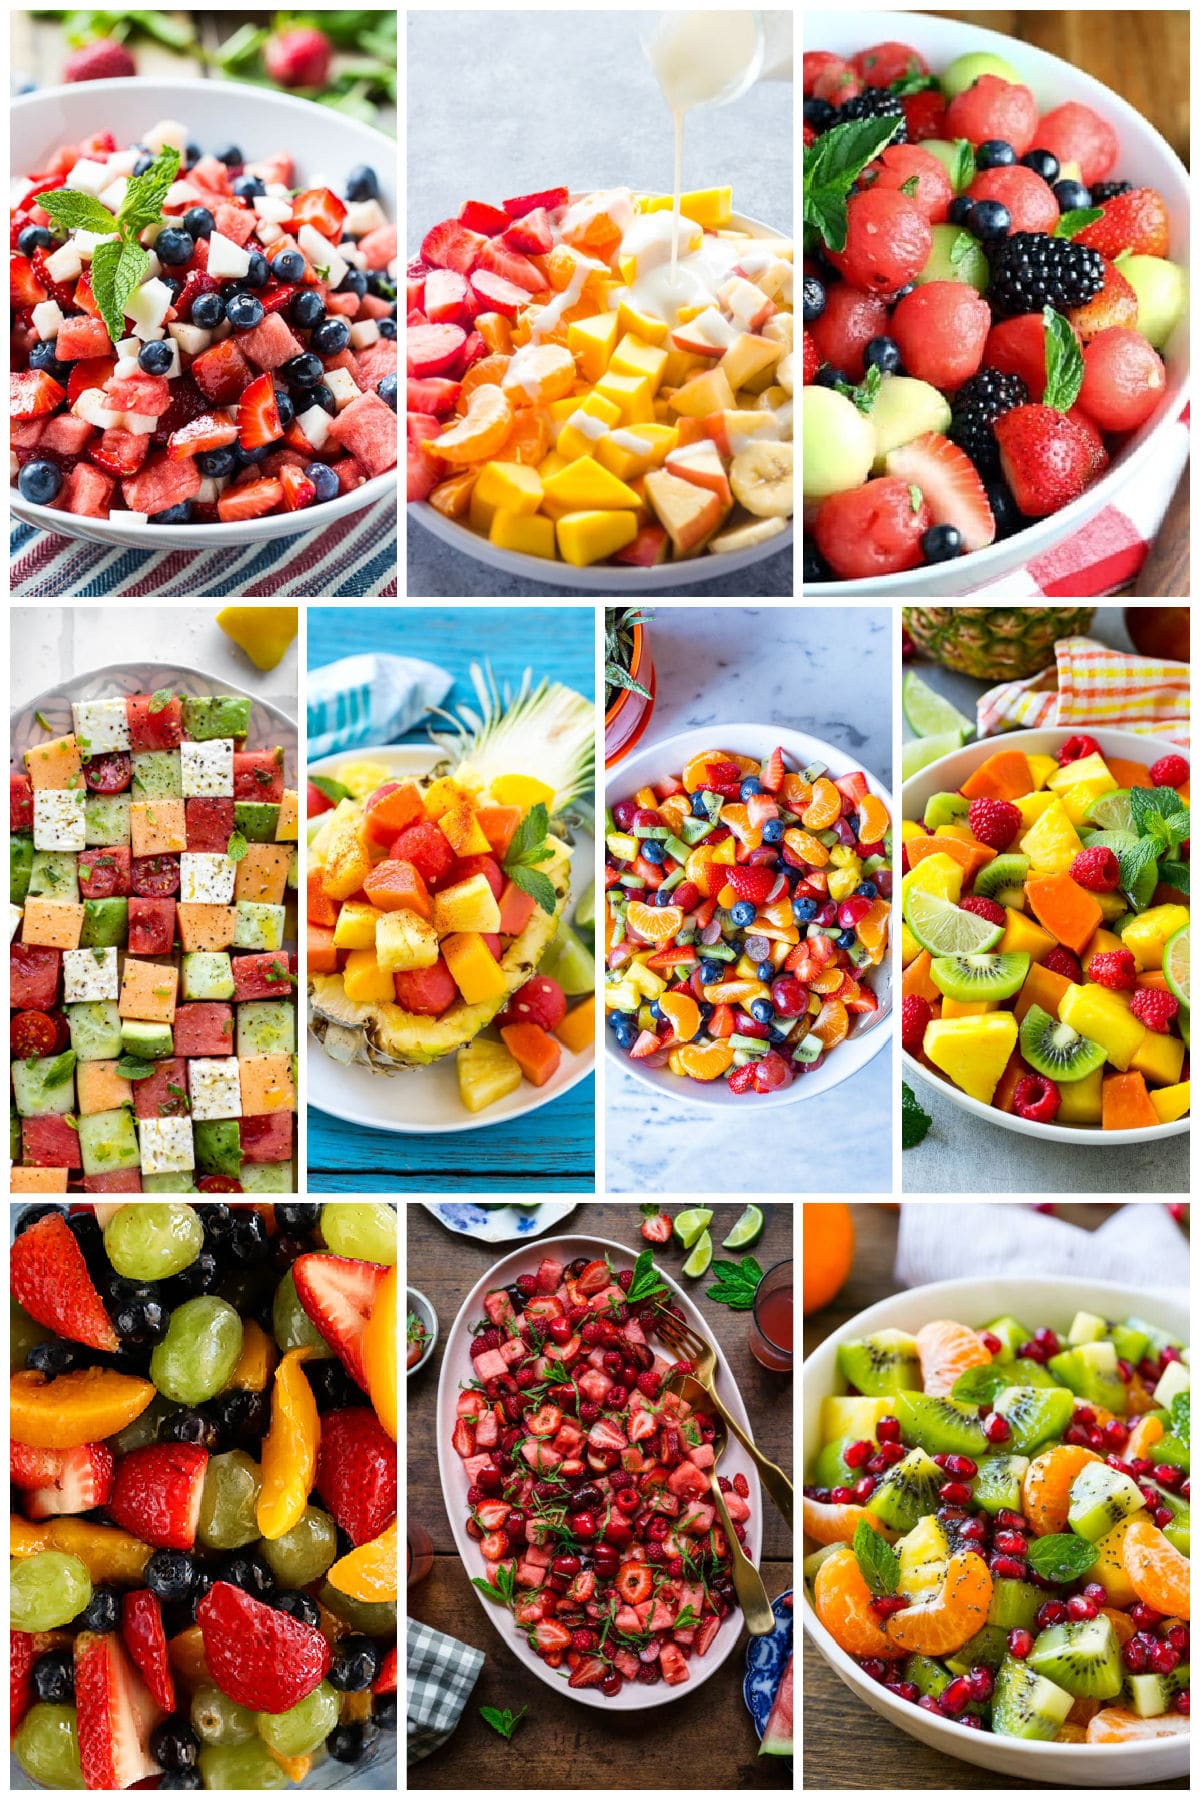 A collection of images showing fruit salad recipes like melon berry salad and tropical fruit salad.